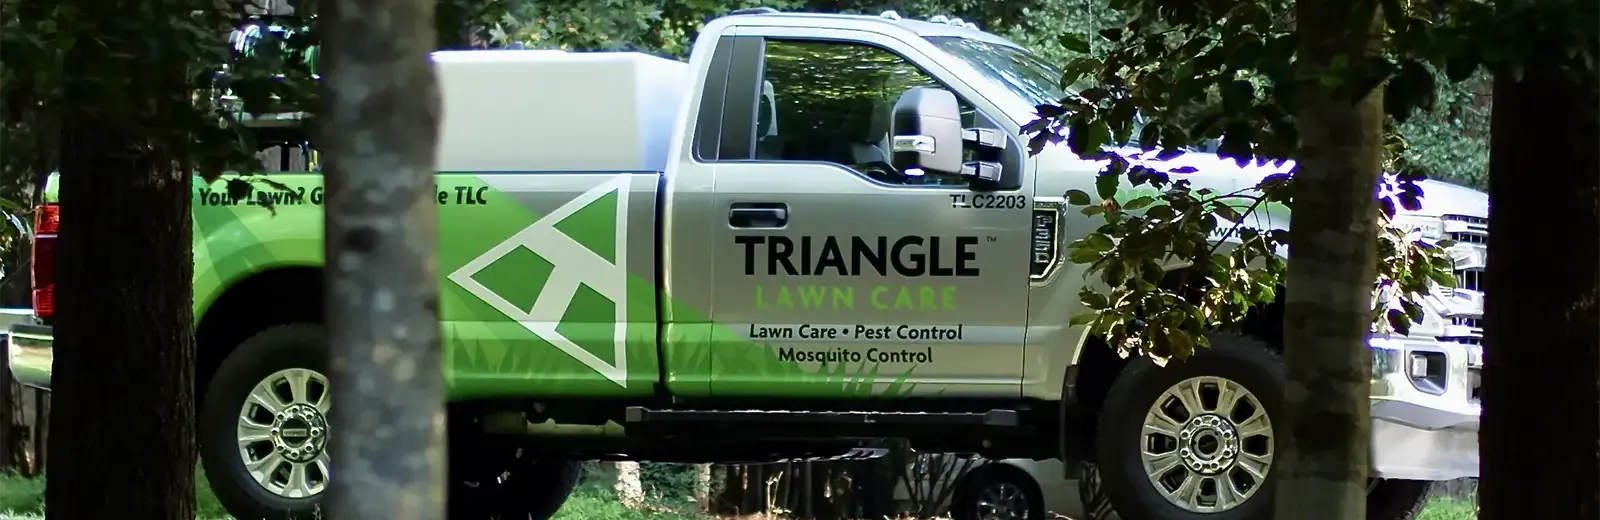 Triangle Lawn Care truck parked outside home